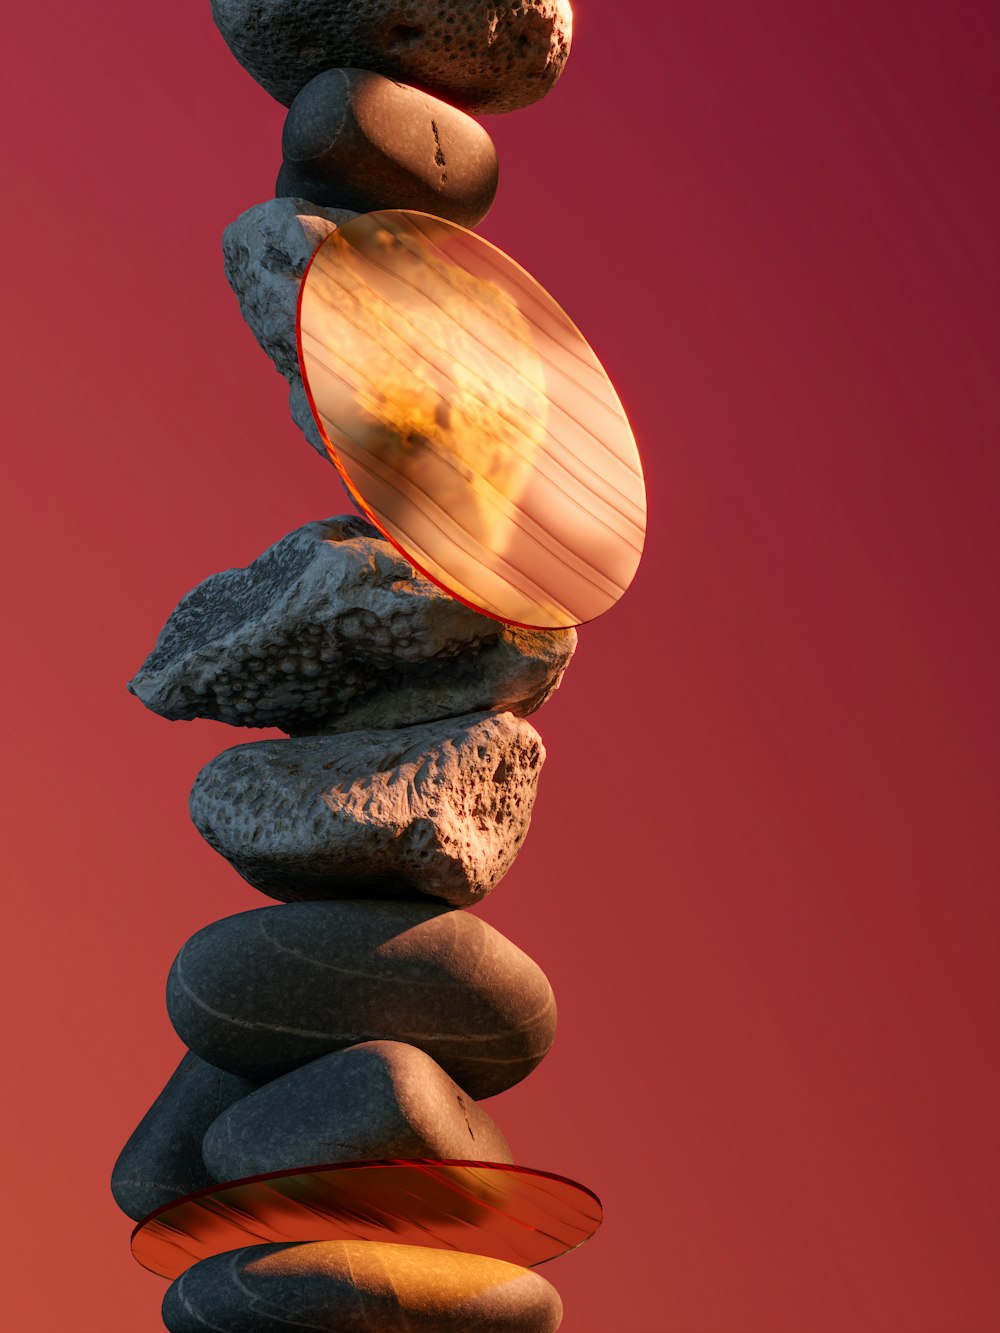 a stack of rocks sitting on top of each other